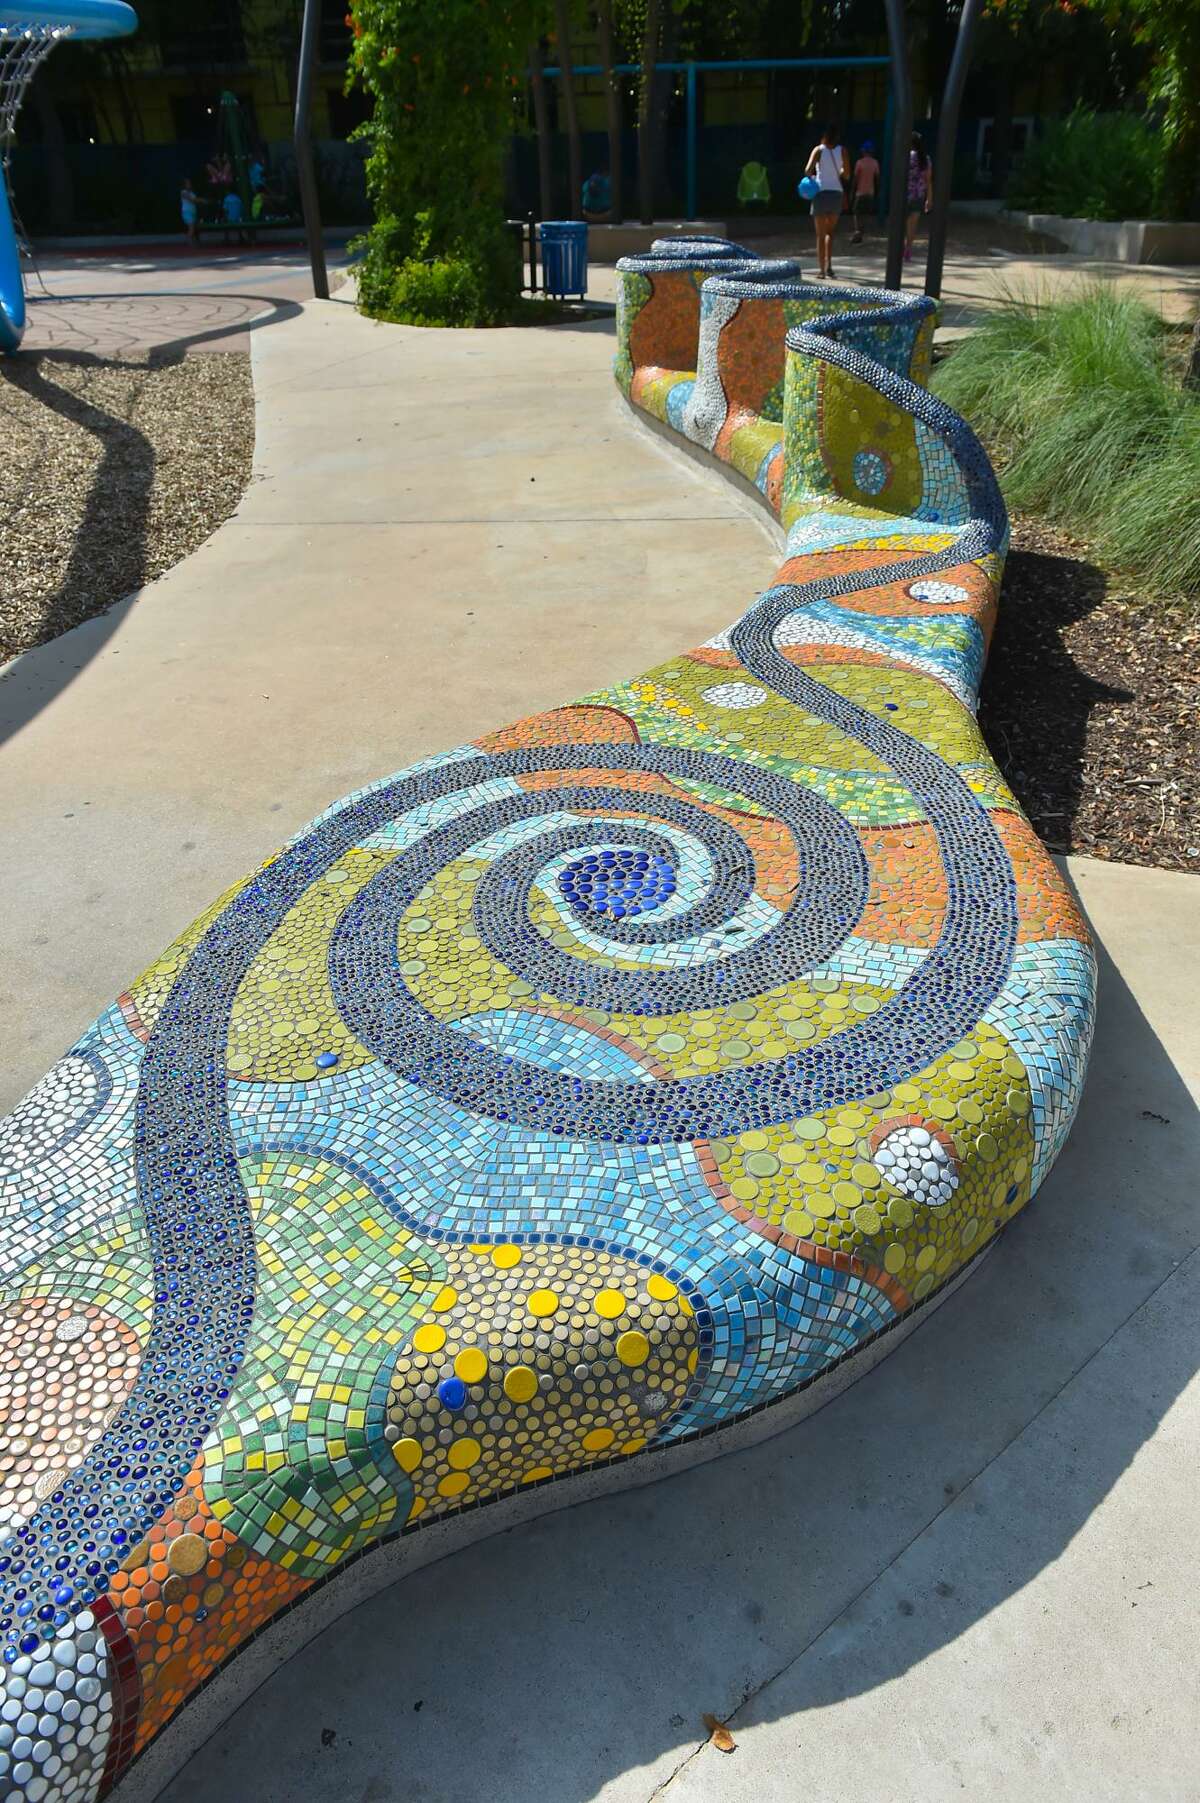 Artist Oscar Alvarado’s favorite part of the installation he created at Yanaguana Garden at Hemisfair is the depiction of the blue hole, the source of the San Antonio River.